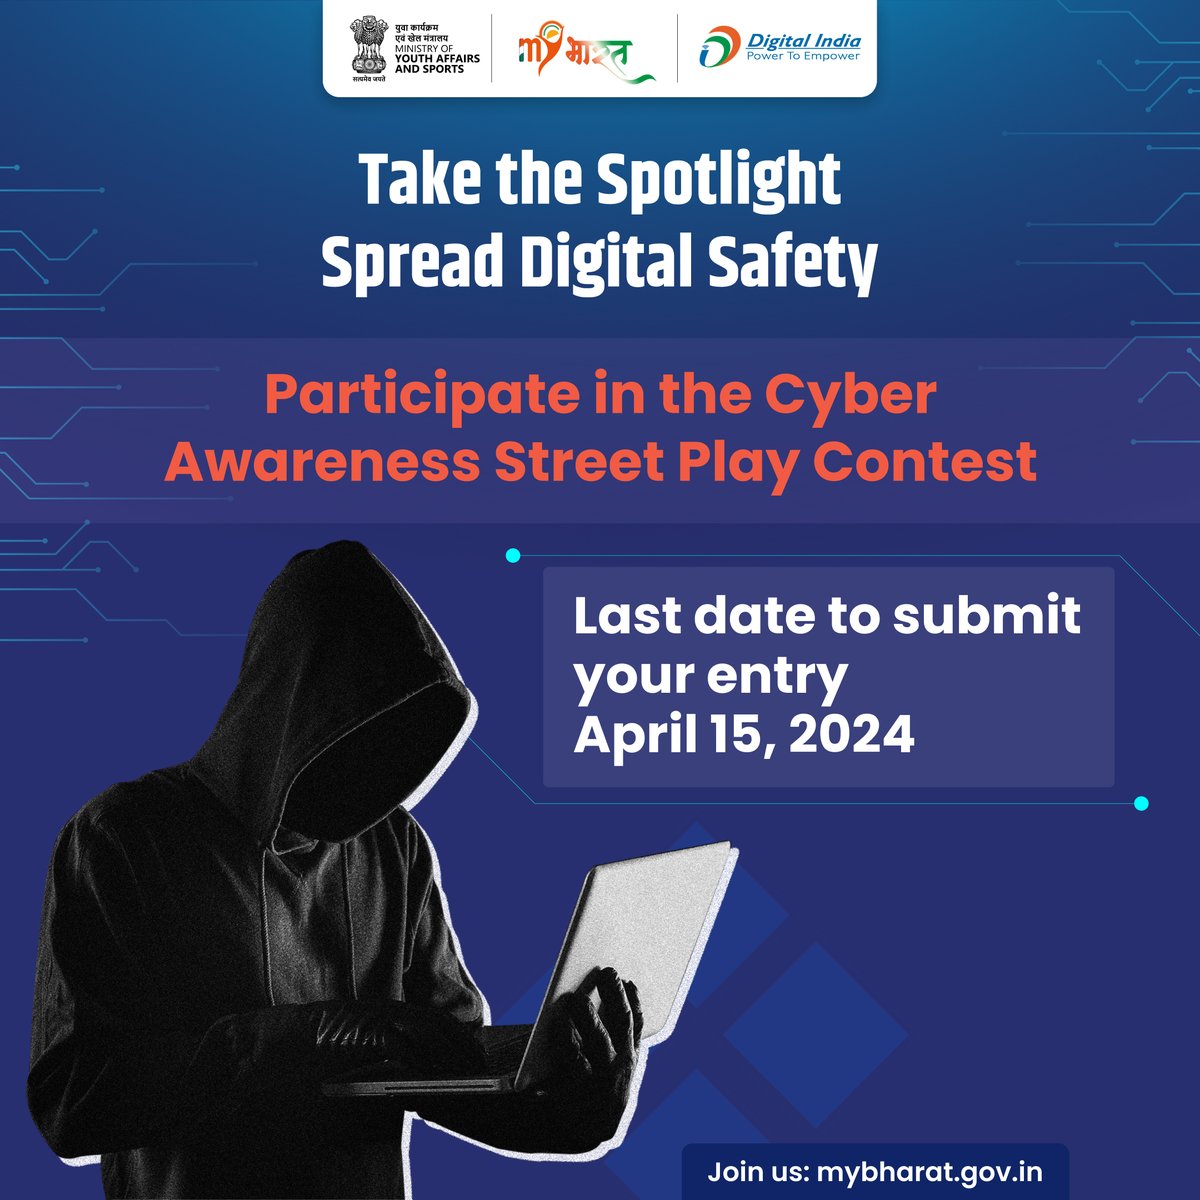 Participate in the Cyber Awareness Street Play Contest and be a part of spreading digital safety awareness! Don't miss this opportunity to make a difference in your community. Visit mybharat.gov.in to participate. #MYBharat #cyberawareness #DigitalSafety #opportunity